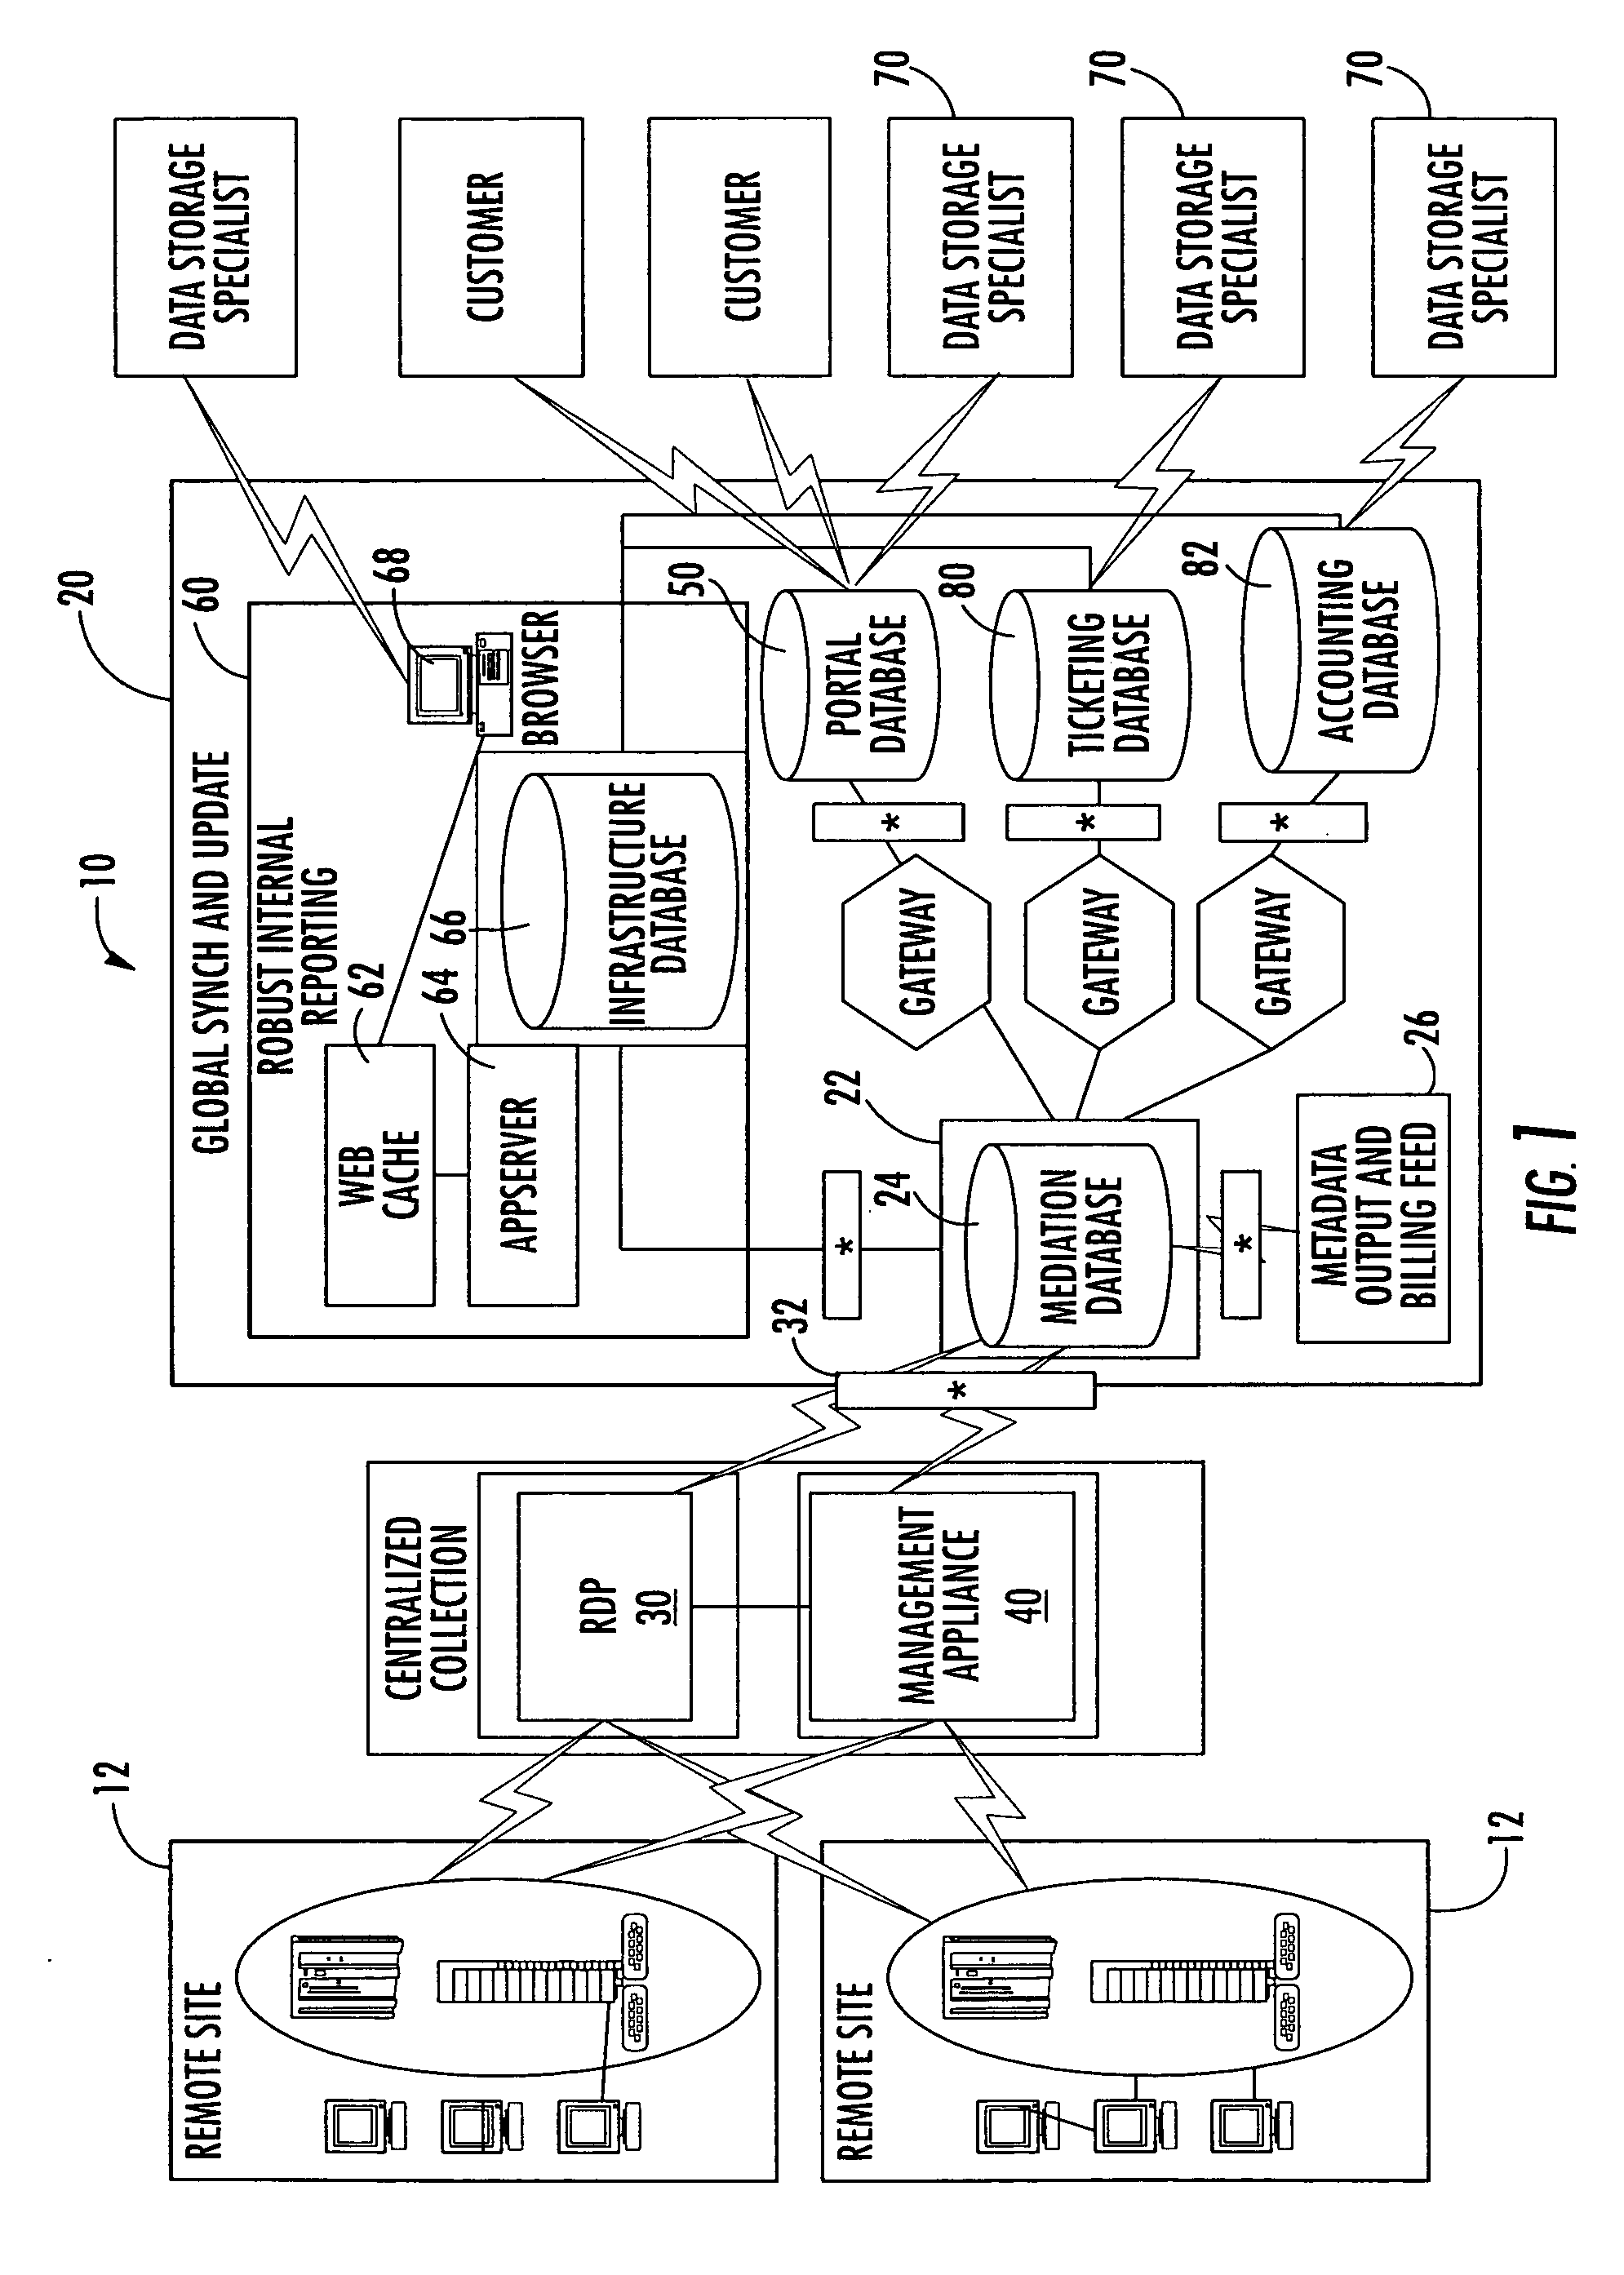 Agent-less systems, methods and computer program products for managing a plurality of remotely located data storage systems